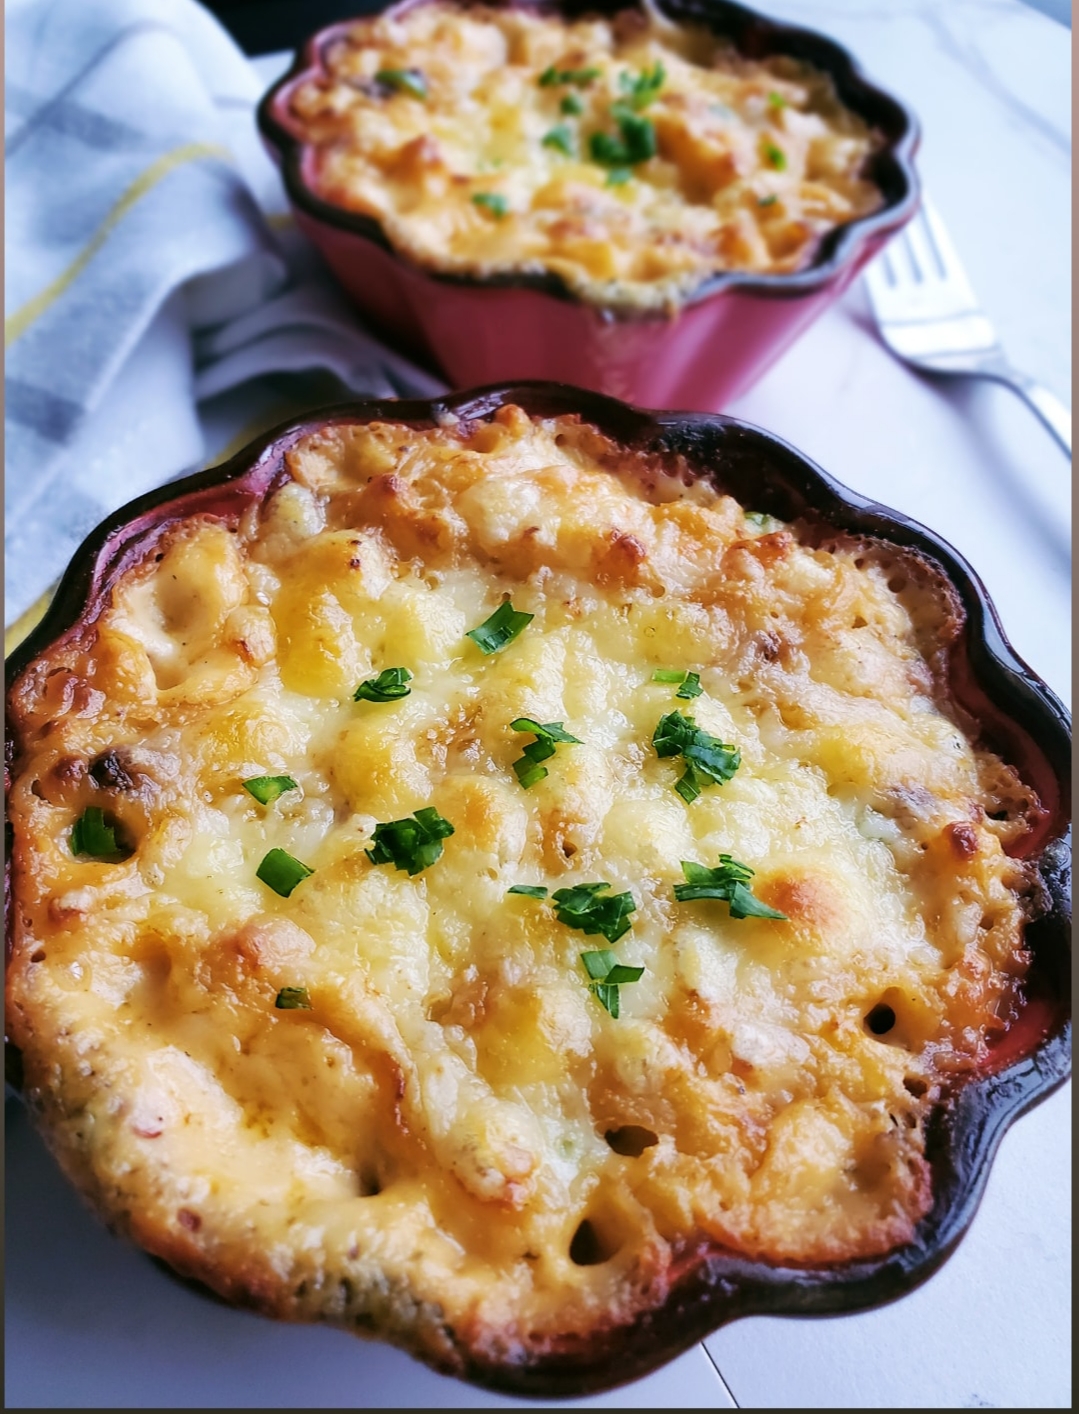 THE CREAMIEST MACARONI AND CHEESE – Make It Brunch